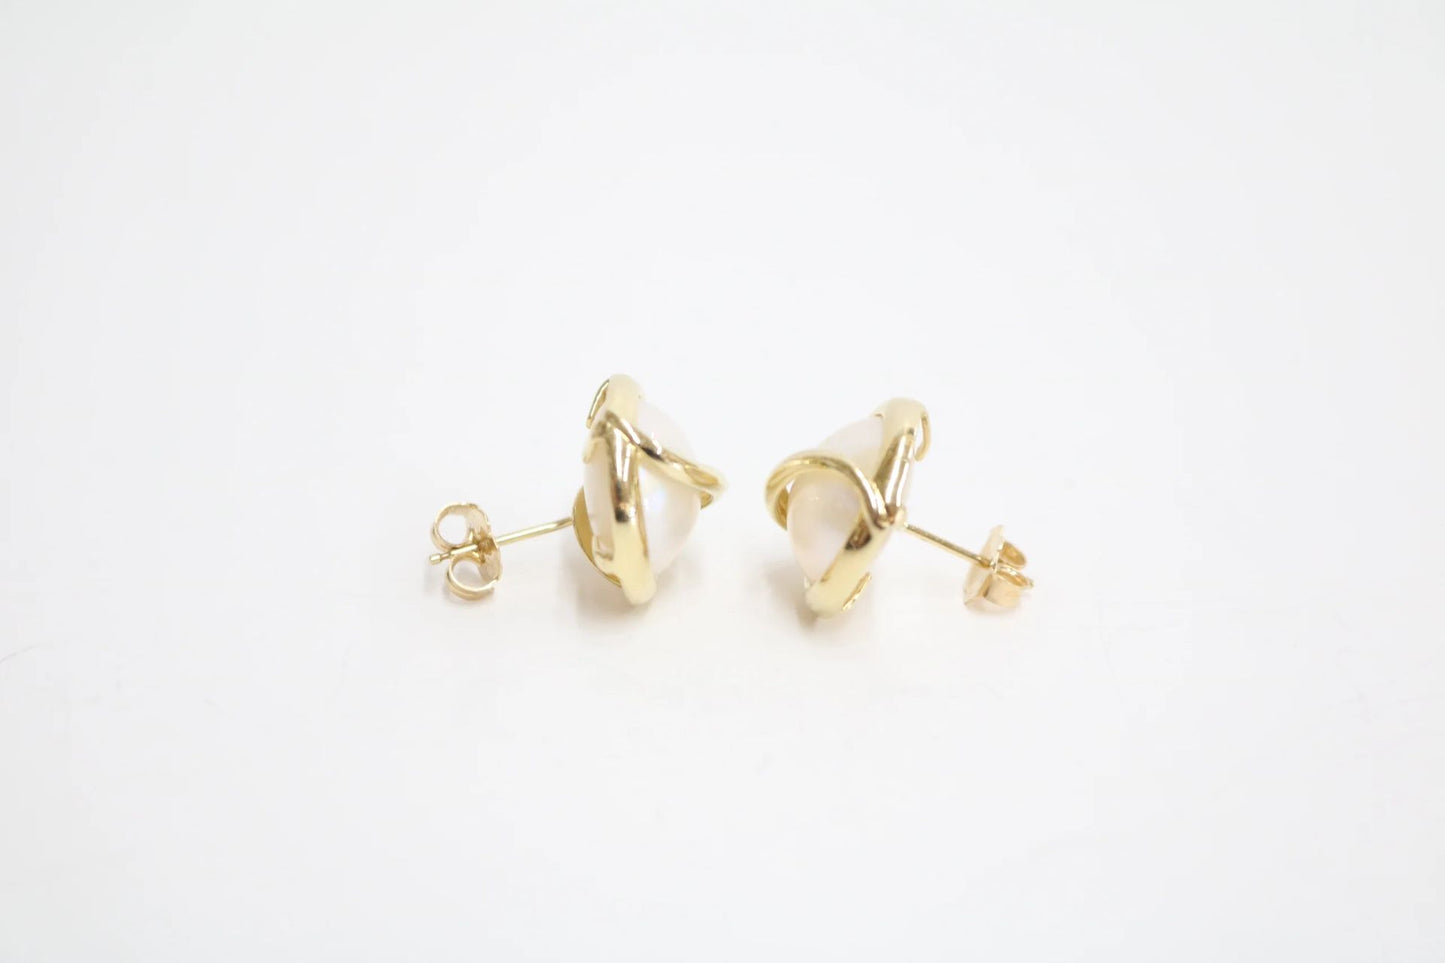 Pre-Owned 14K Yellow Gold Pearl Earrings